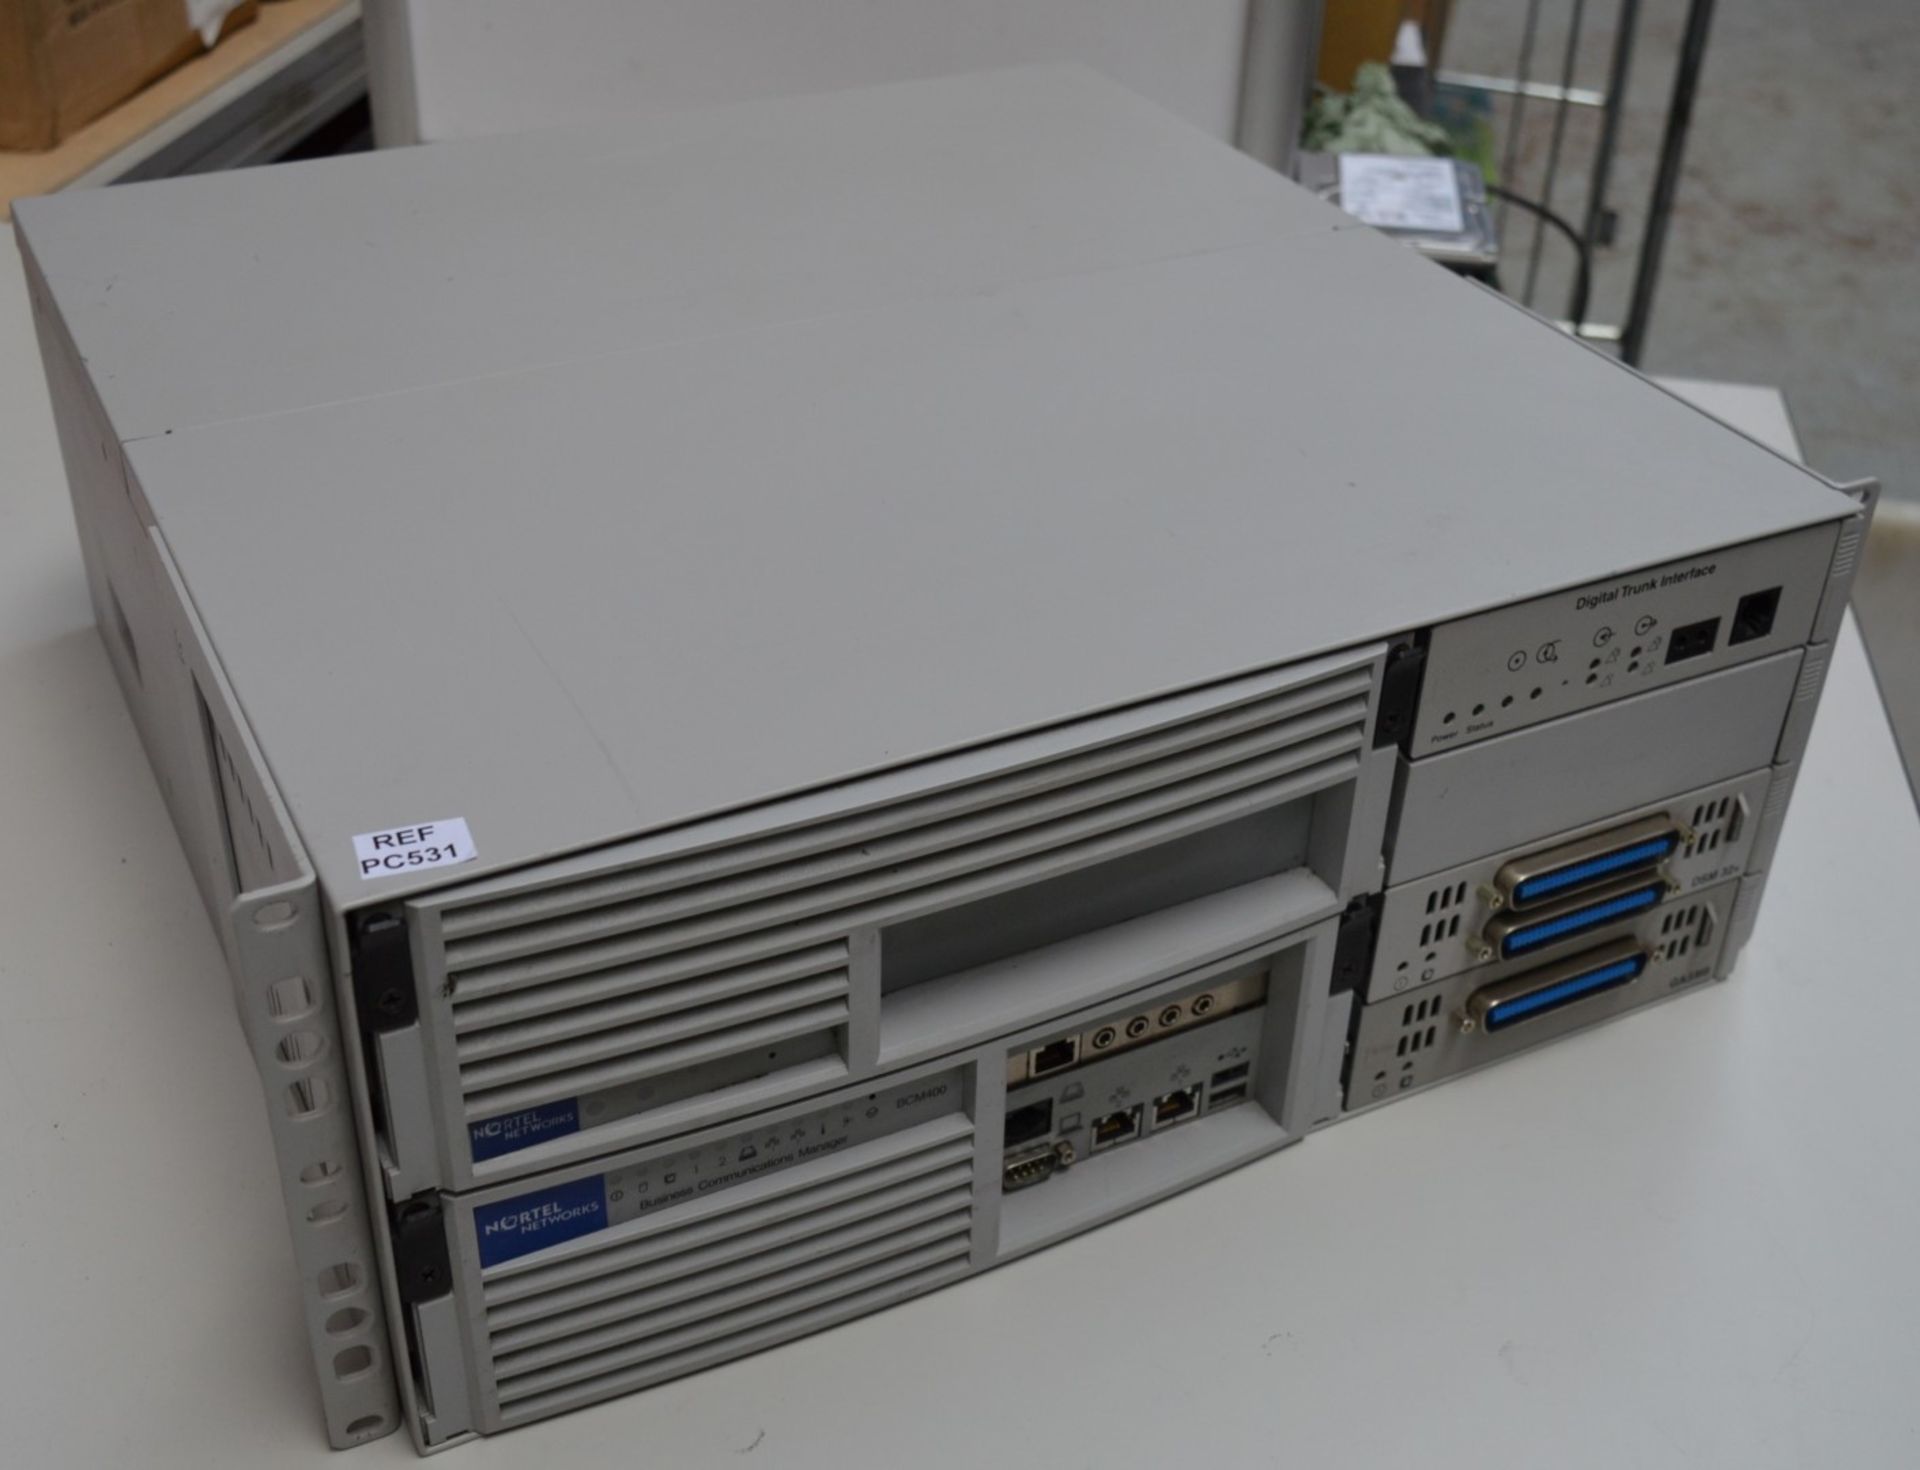 1 x Nortel Business Communication Manager BCM 400 with Digital Truck Interface, GASM8 Card ad DSM - Image 2 of 8